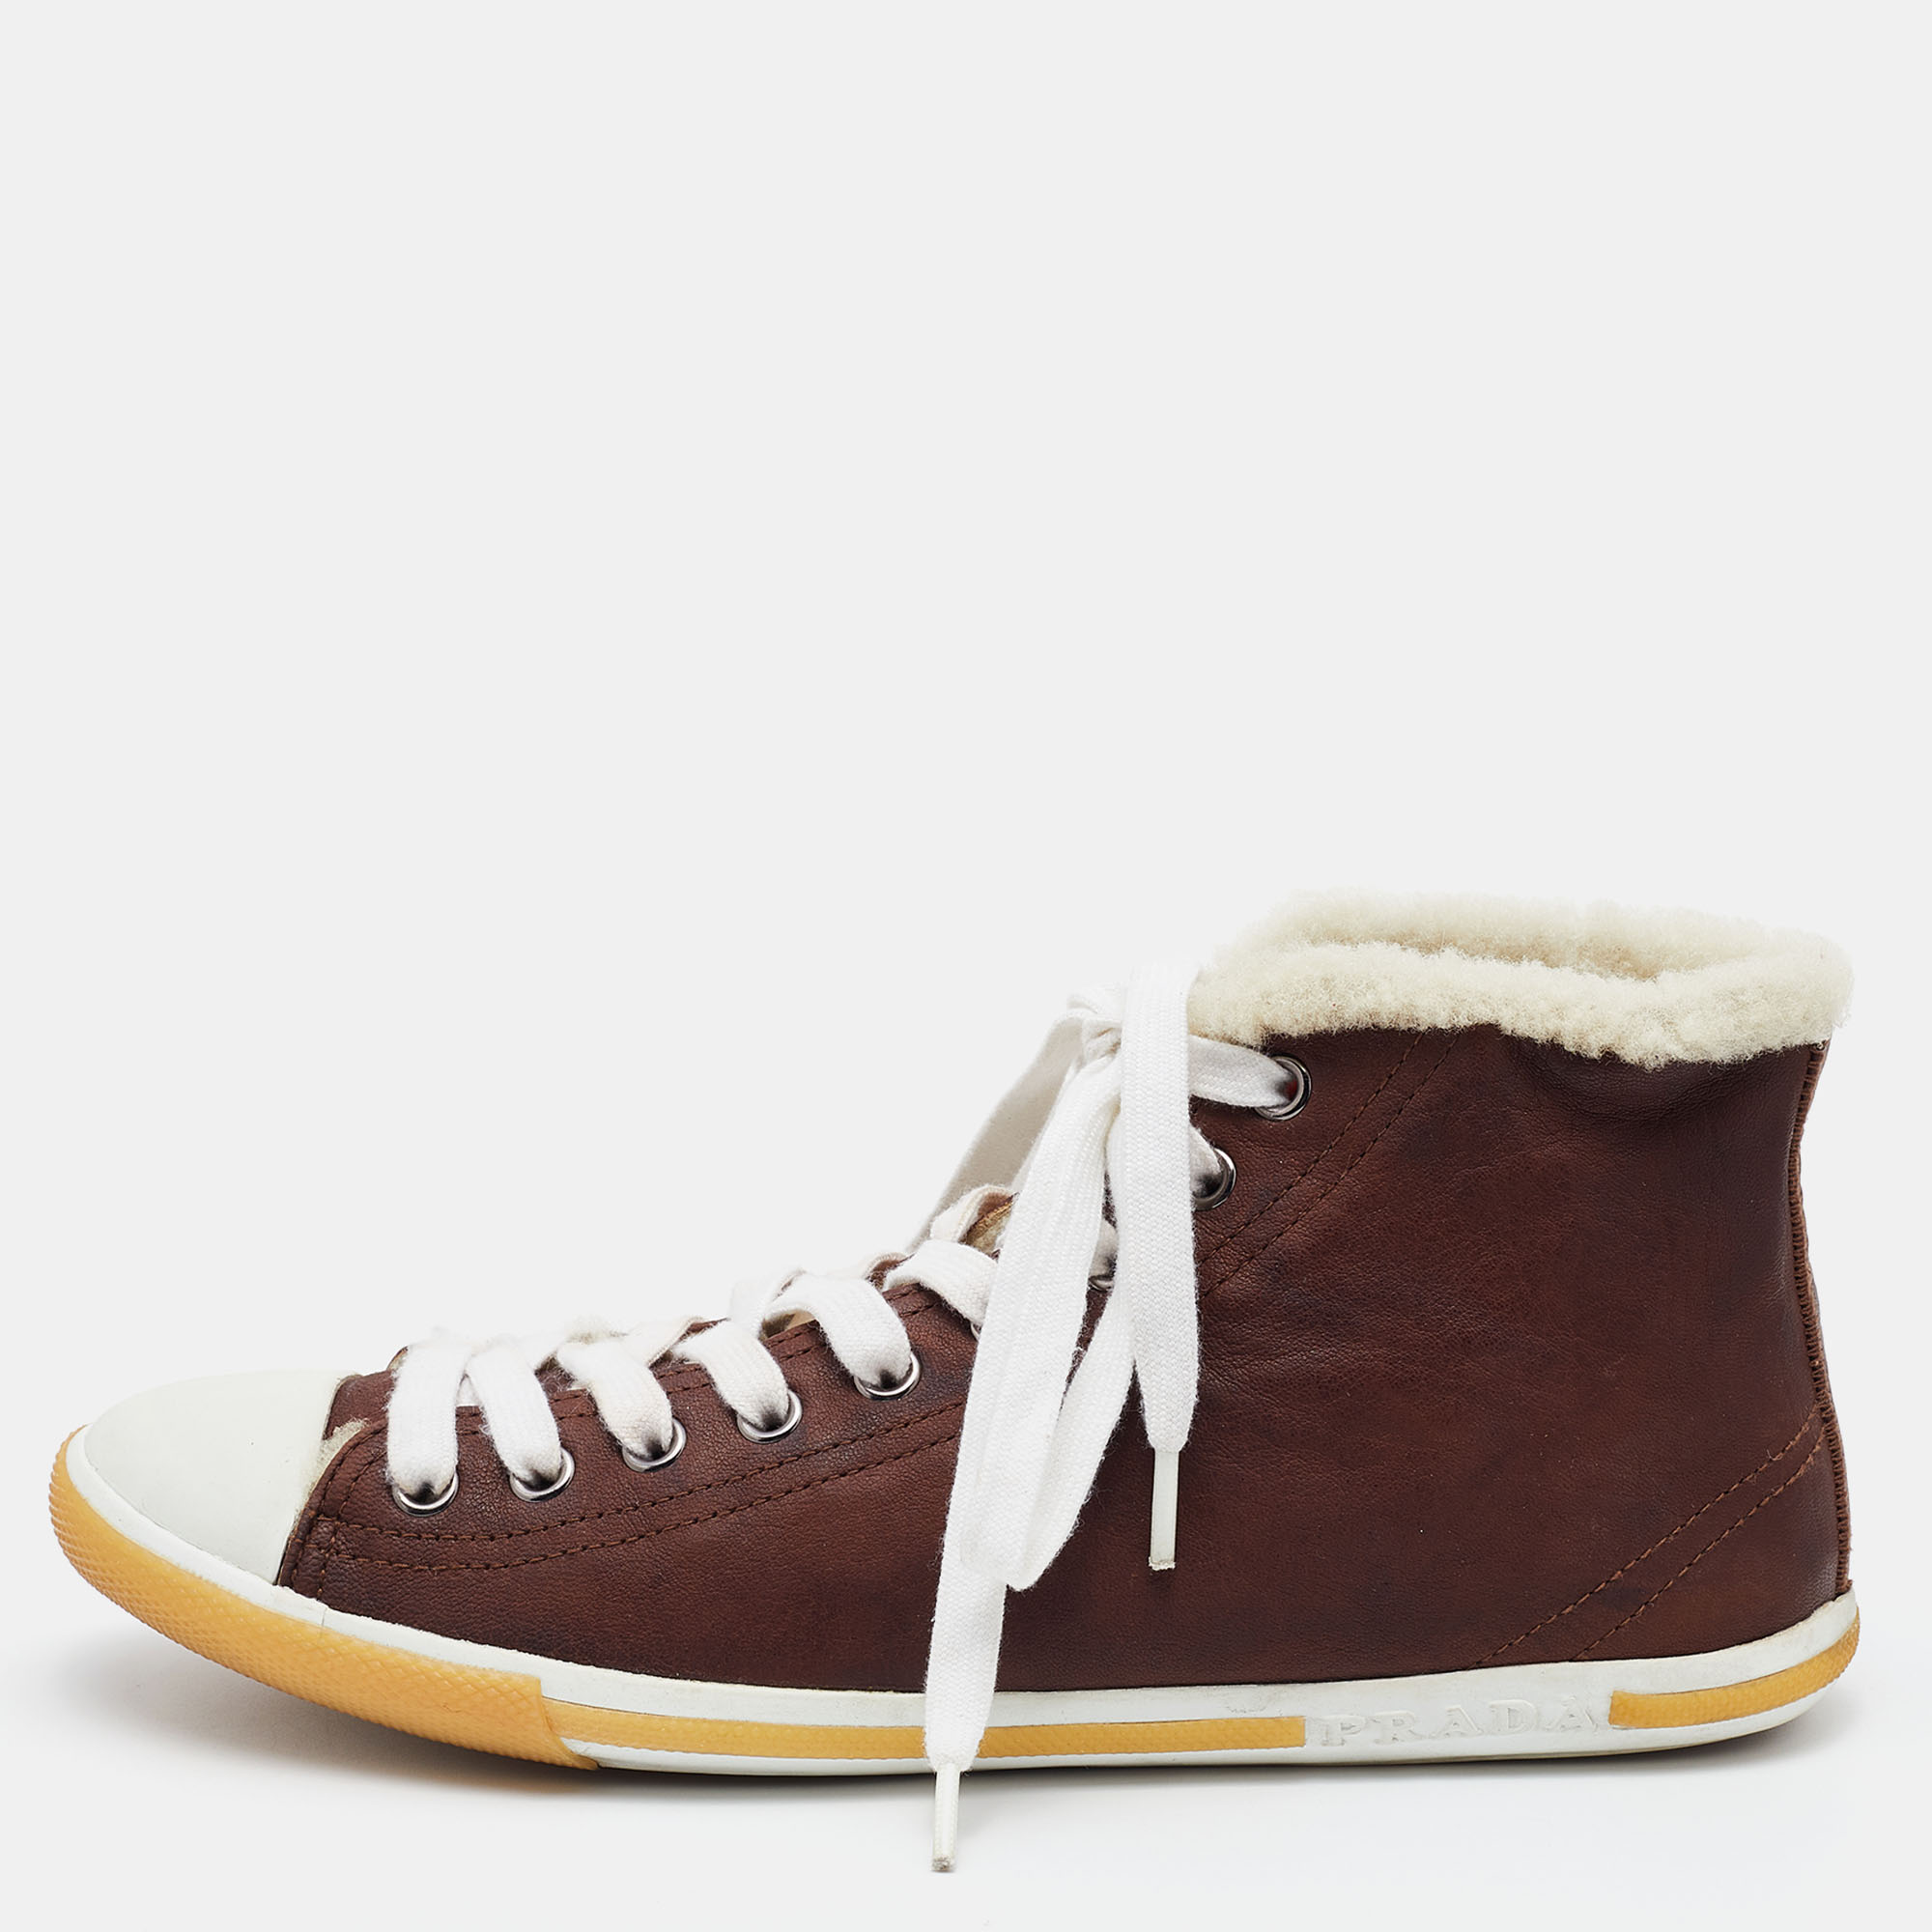 

Prada Brown/White Nubuck Leather and Shearling Fur Lace Up Sneakers Size